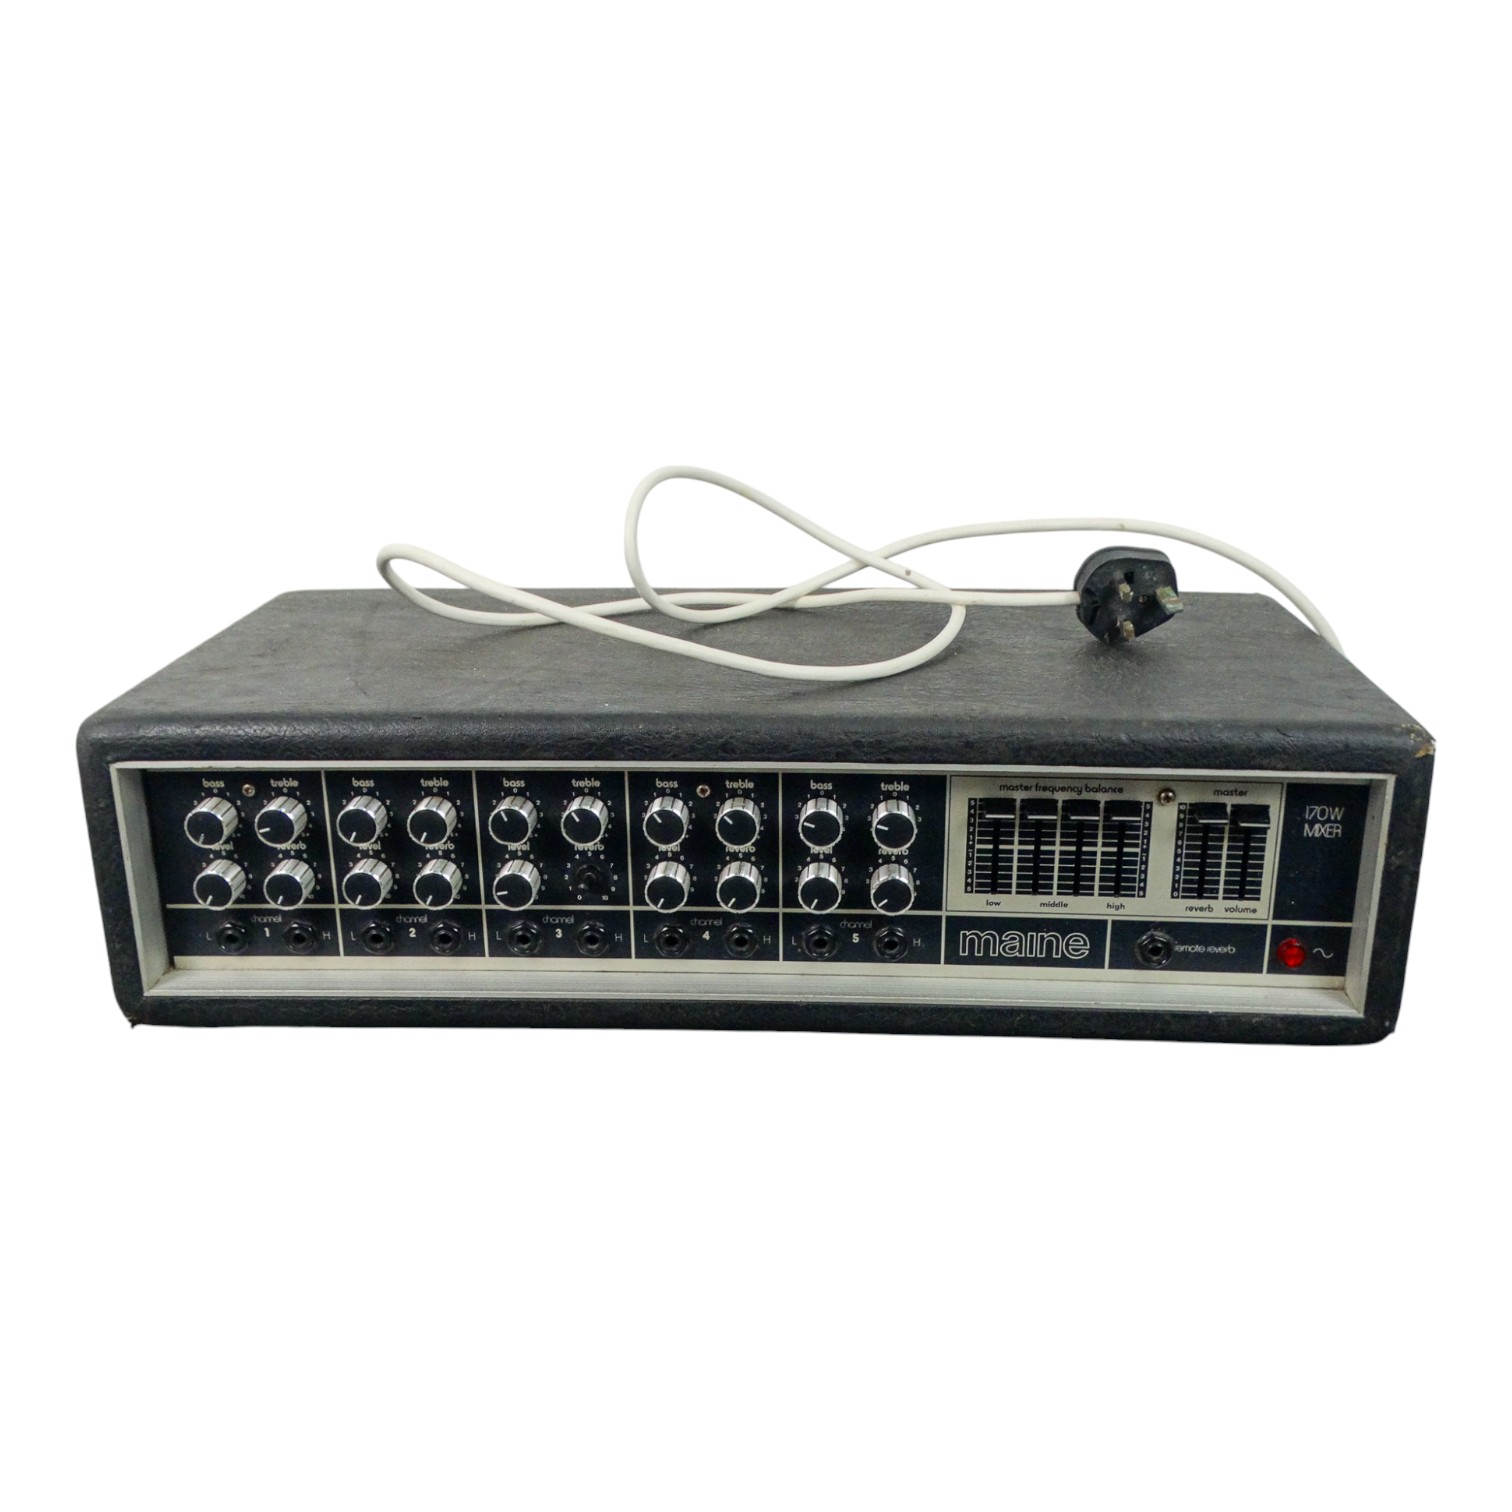 A Maine amplifier - circa 1970's, model PA 170 with 5 channels, width 161cm.